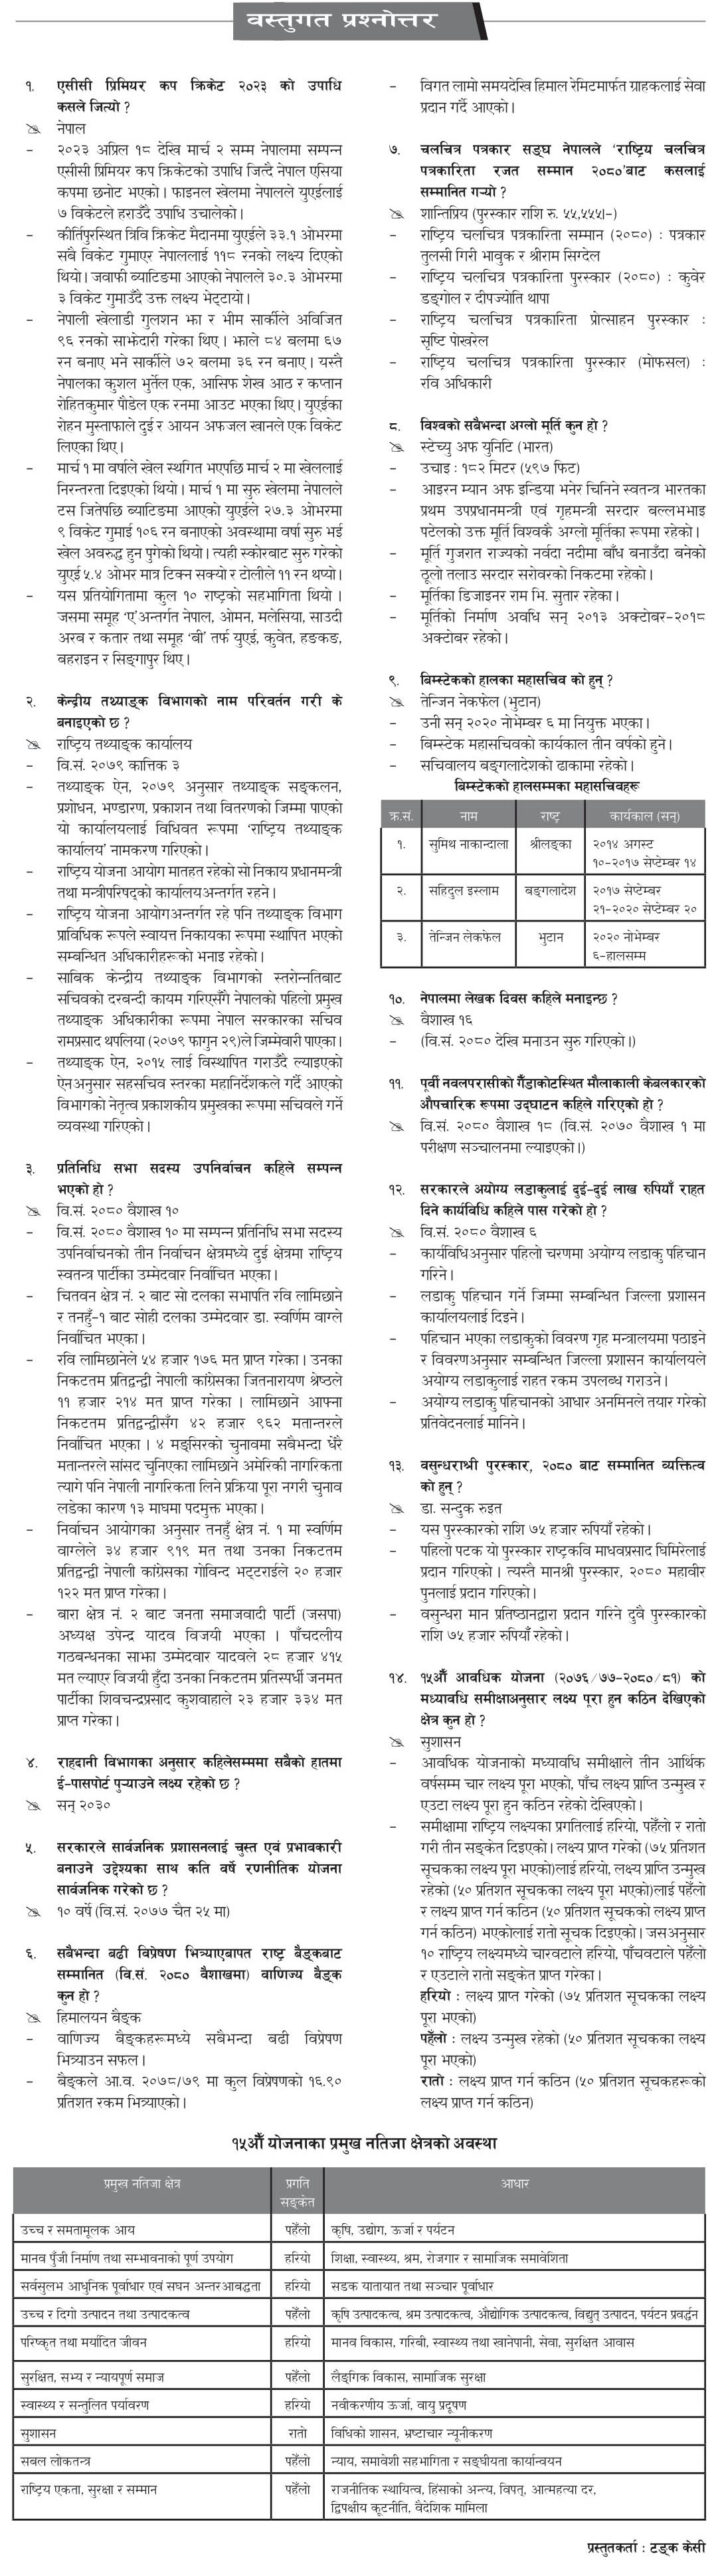 Gorkhapatra Material Objective Question Answer published in 2080 Baishak 20